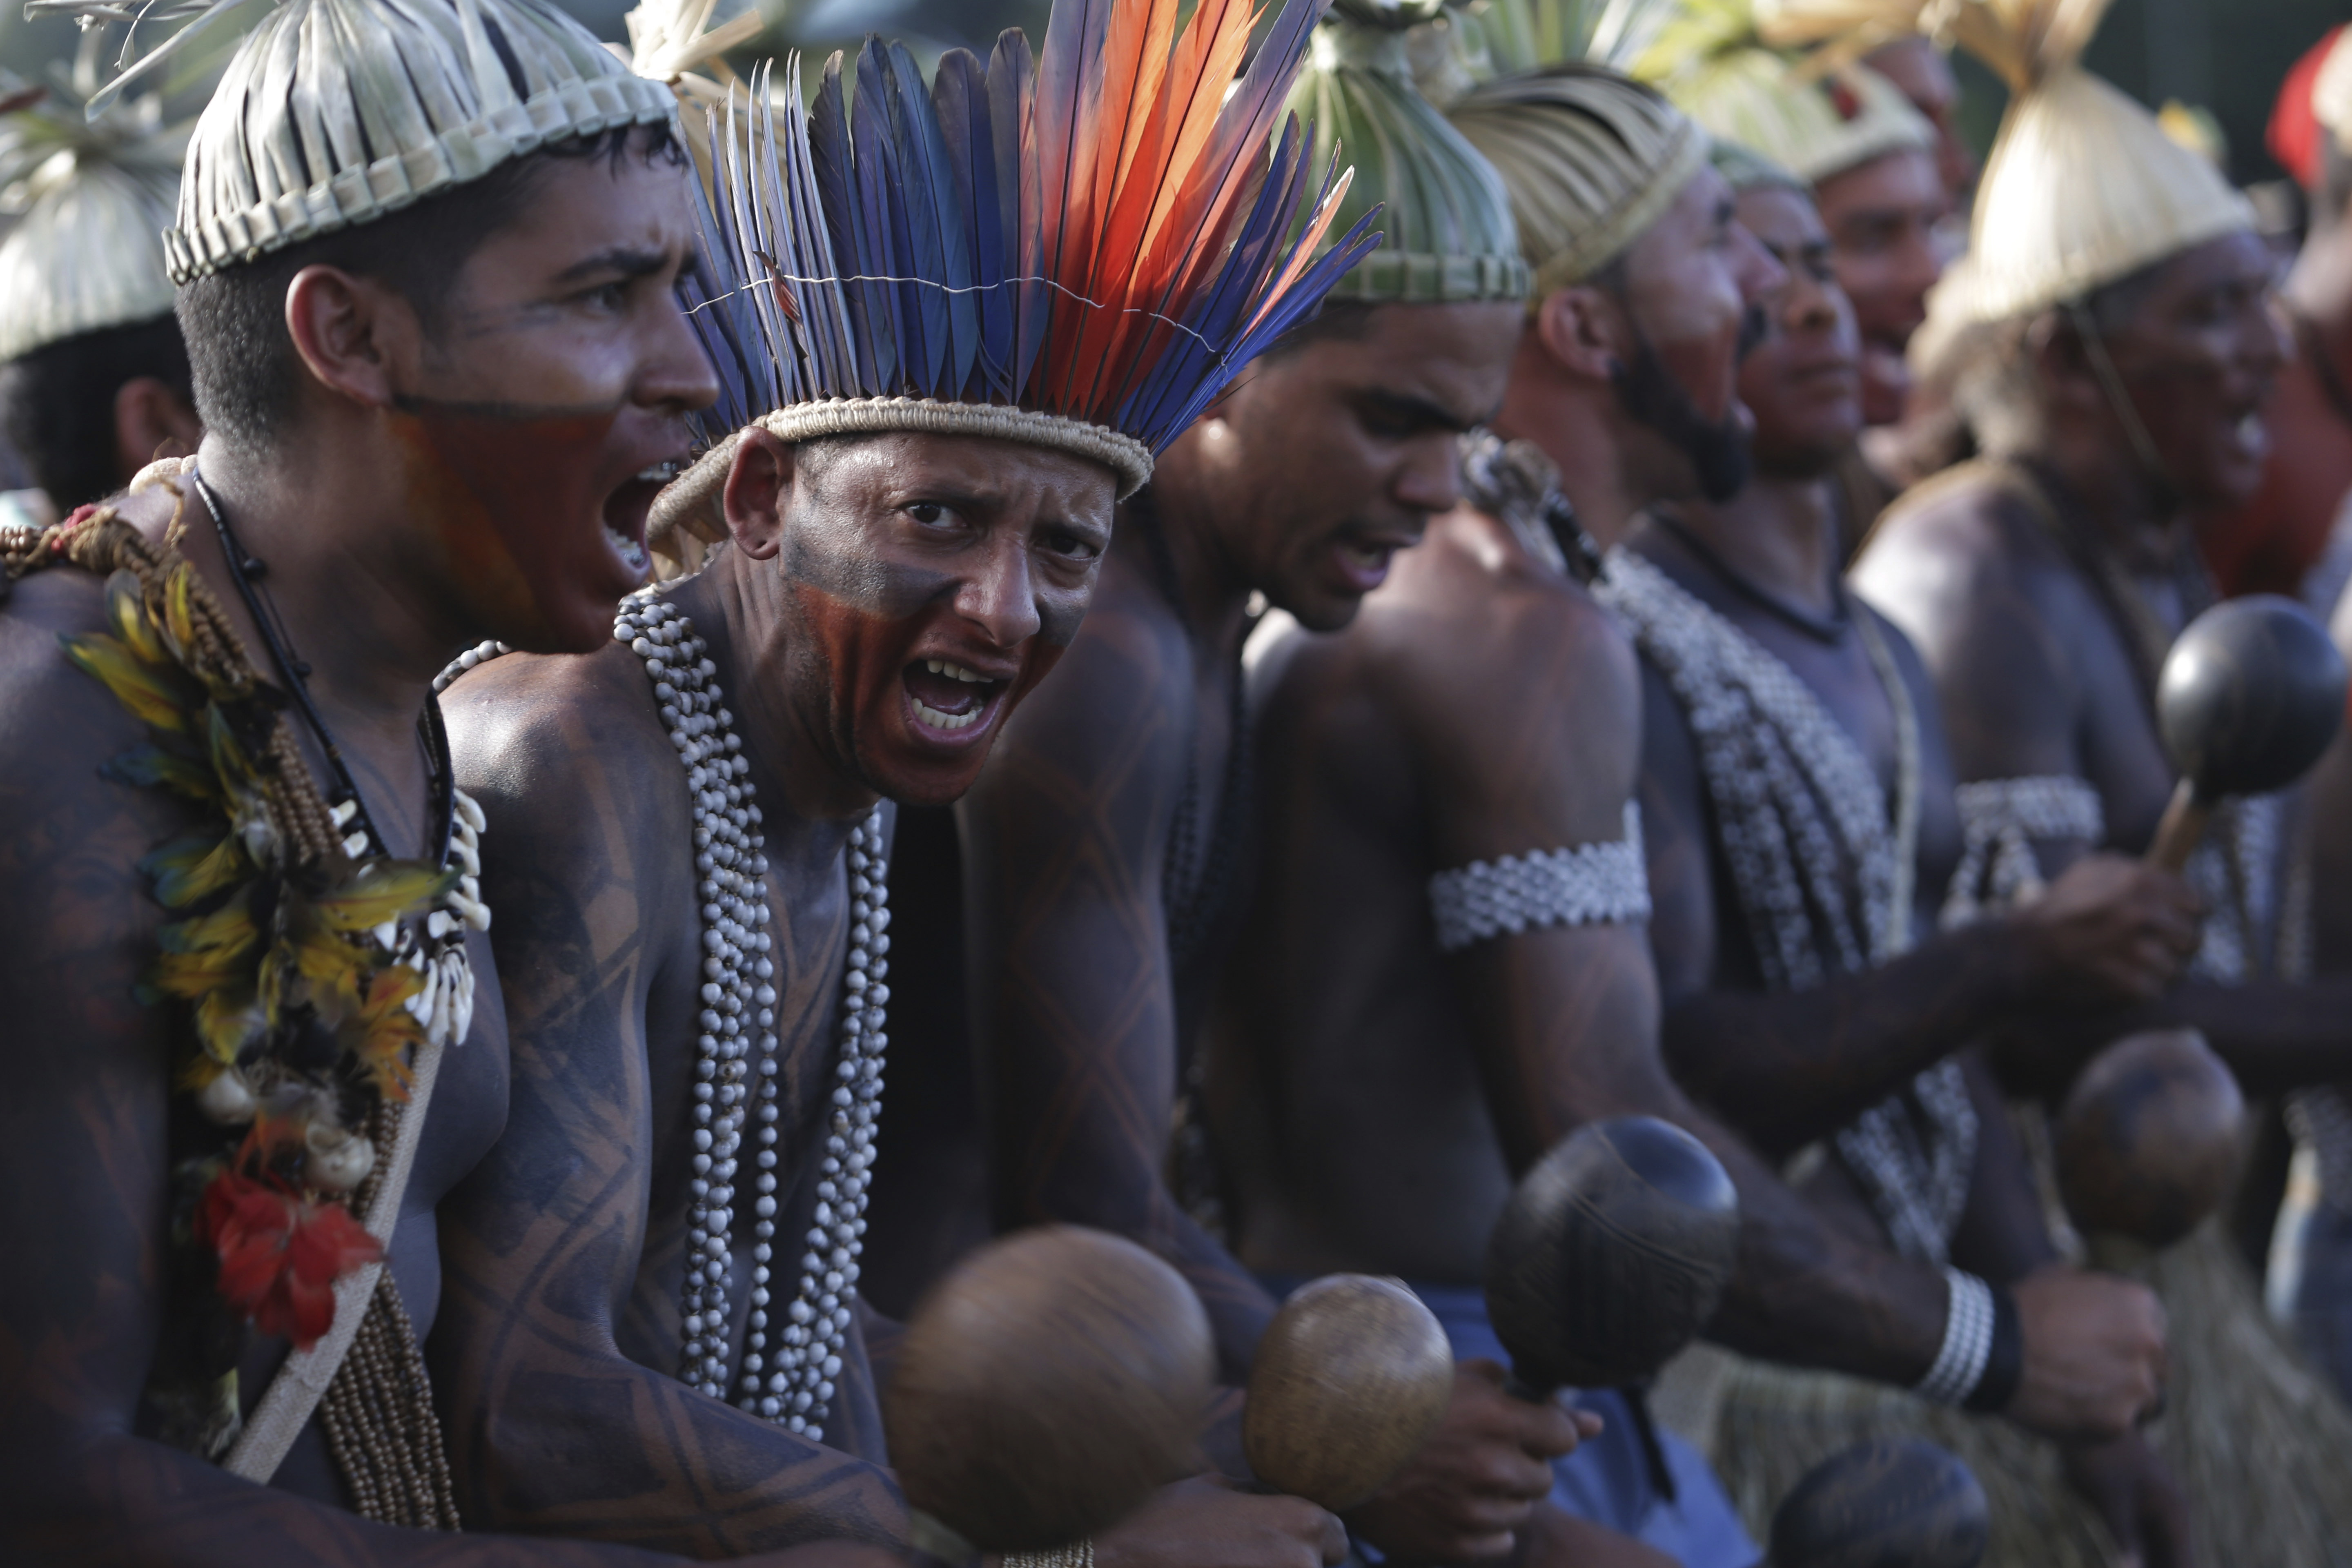 Indigenous people sing and dance during the Indigenous Peoples Ritual March in Brasilia, Brazil, Thursday, April 27, 2017. Indigenous leaders say the government of President Michel Temer is working to roll back protections in various parts of the Amazon and allowing ranchers and other big-money interest to steal their lands. (AP Photo/Eraldo Peres)